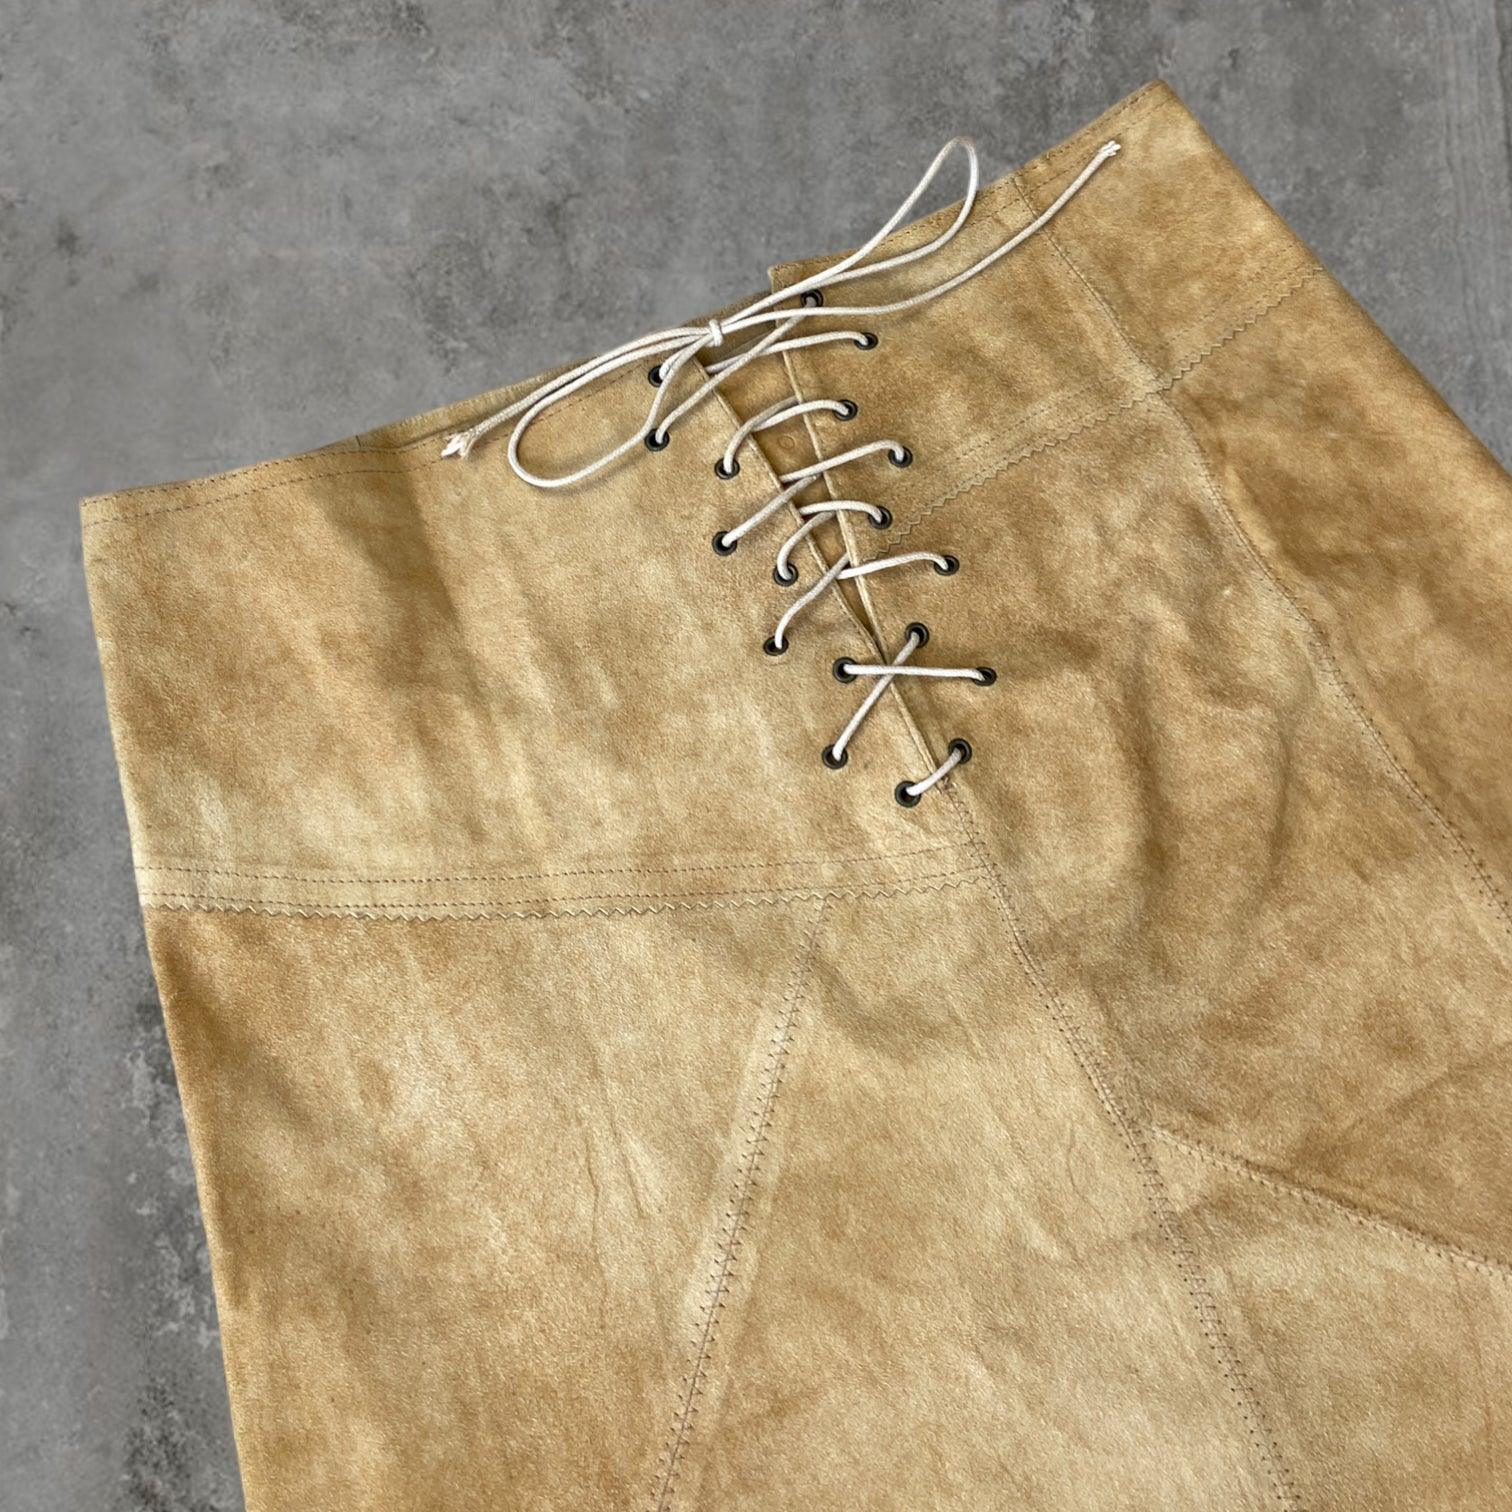 PLEIN SUD LACE UP SUEDE LEATHER SKIRT - M - Known Source